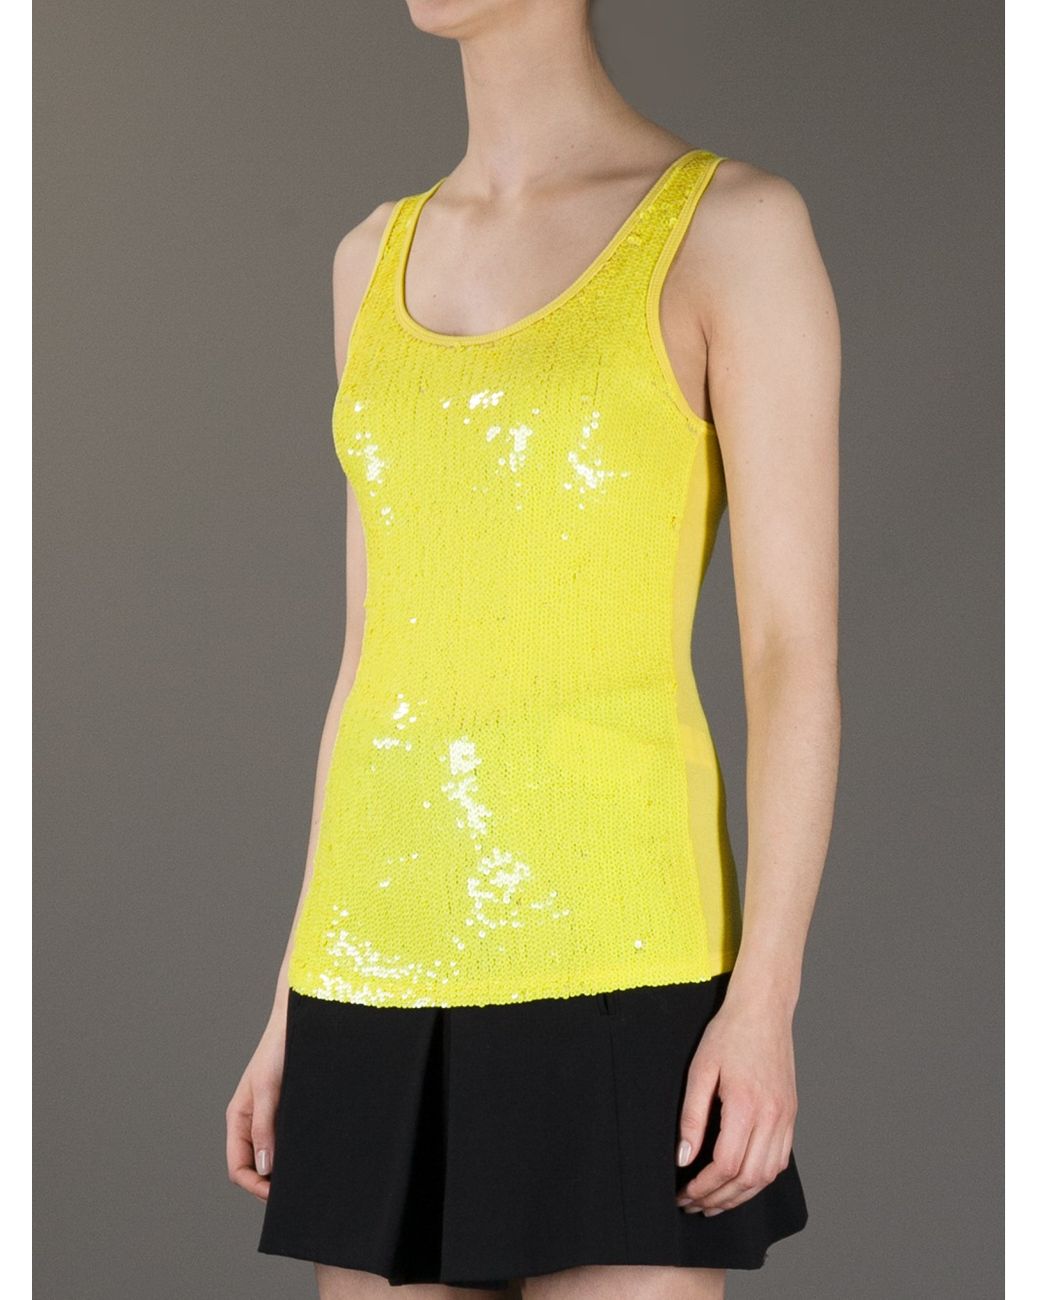 Tops Save 20% Sequined Top Womens Tops P.A.R.O.S.H P.A.R.O.S.H 